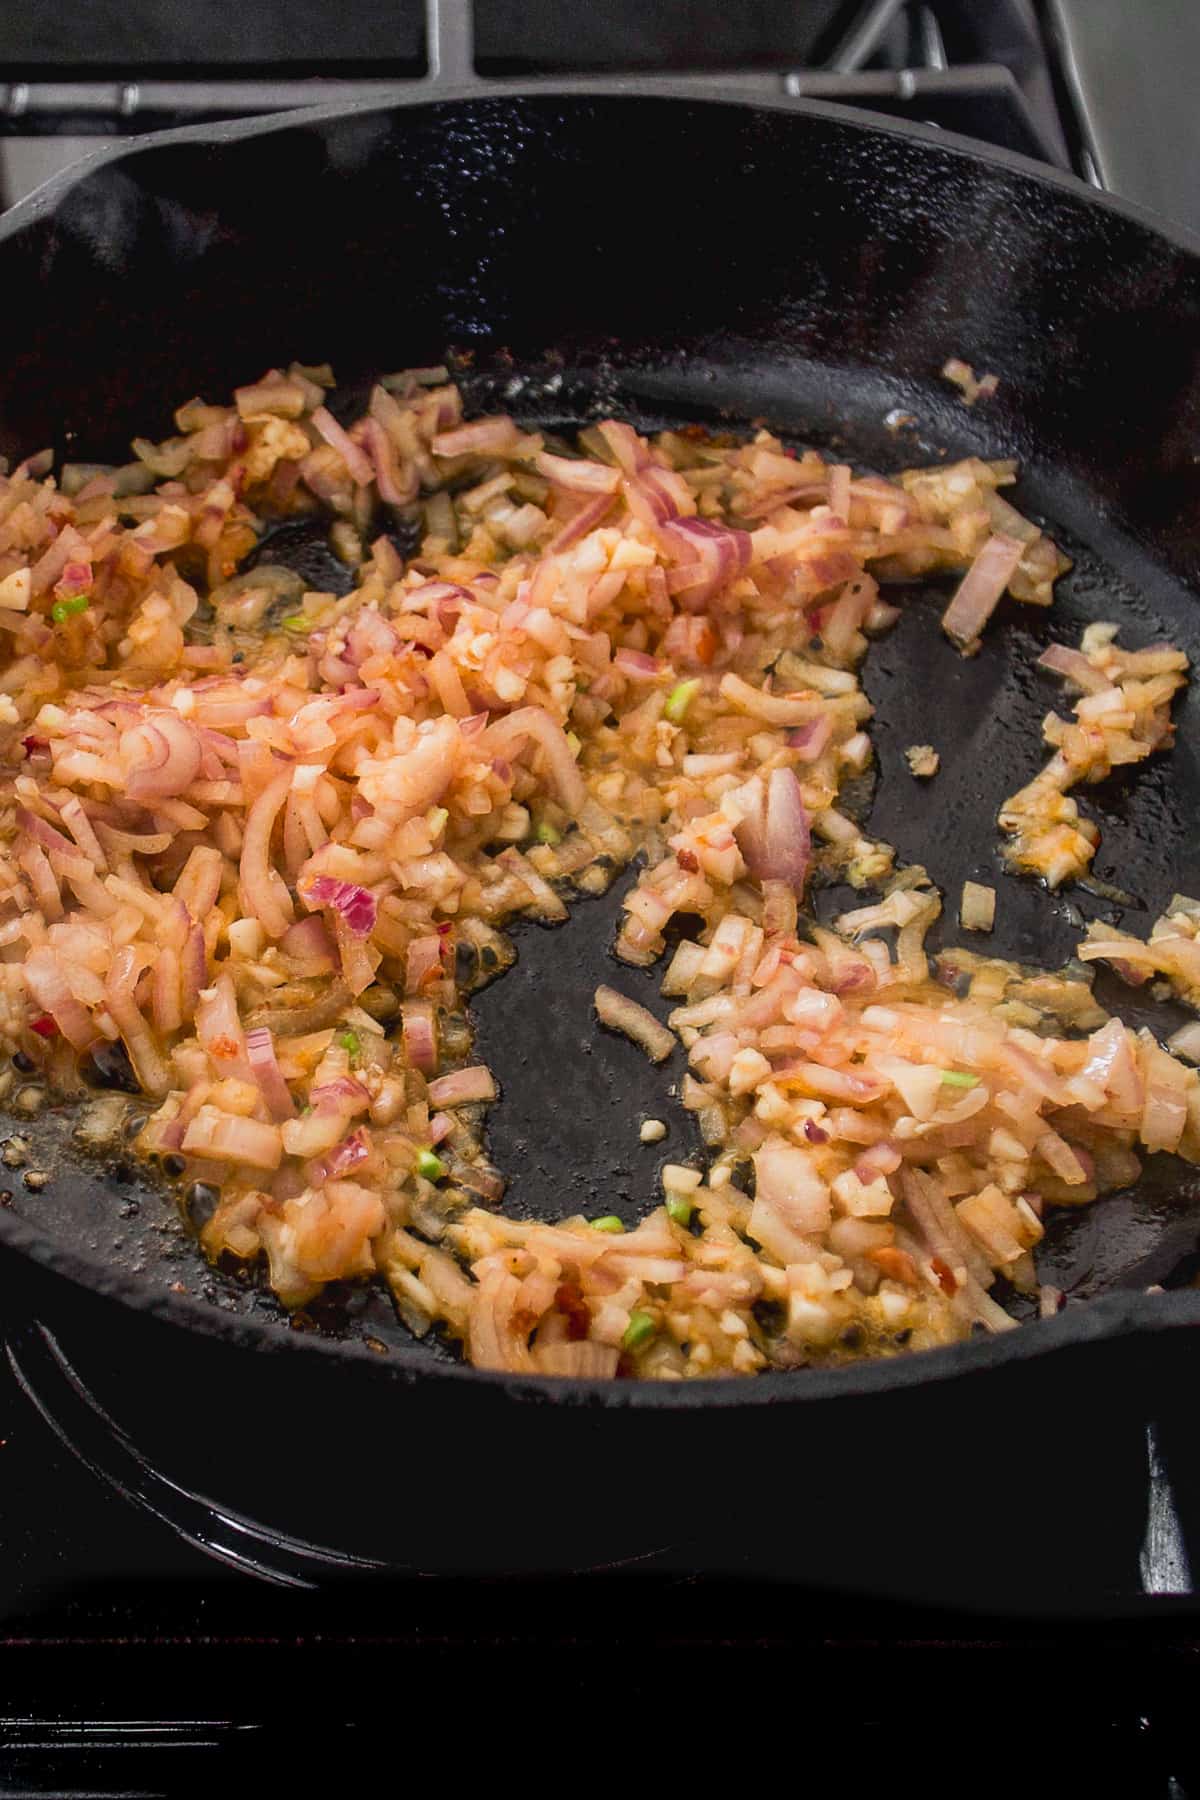 Shallots and onions sauteed in cast iron skillet.